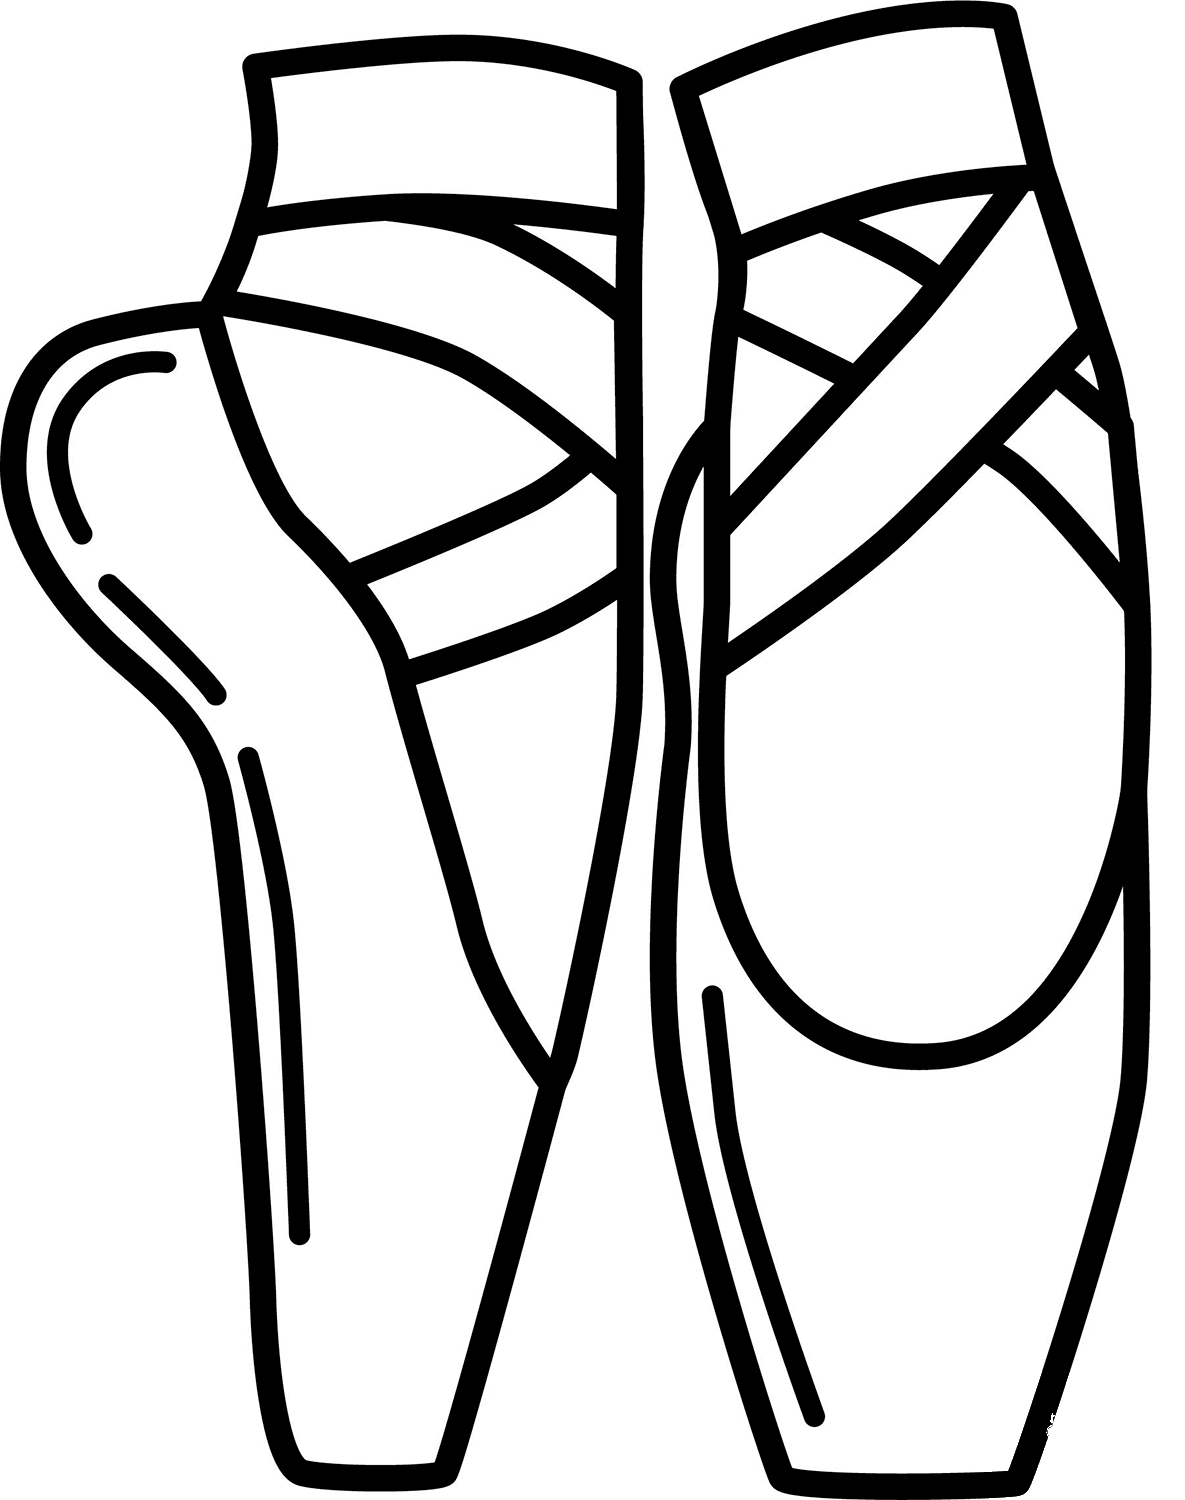 Pointe Shoes coloring page - ColouringPages